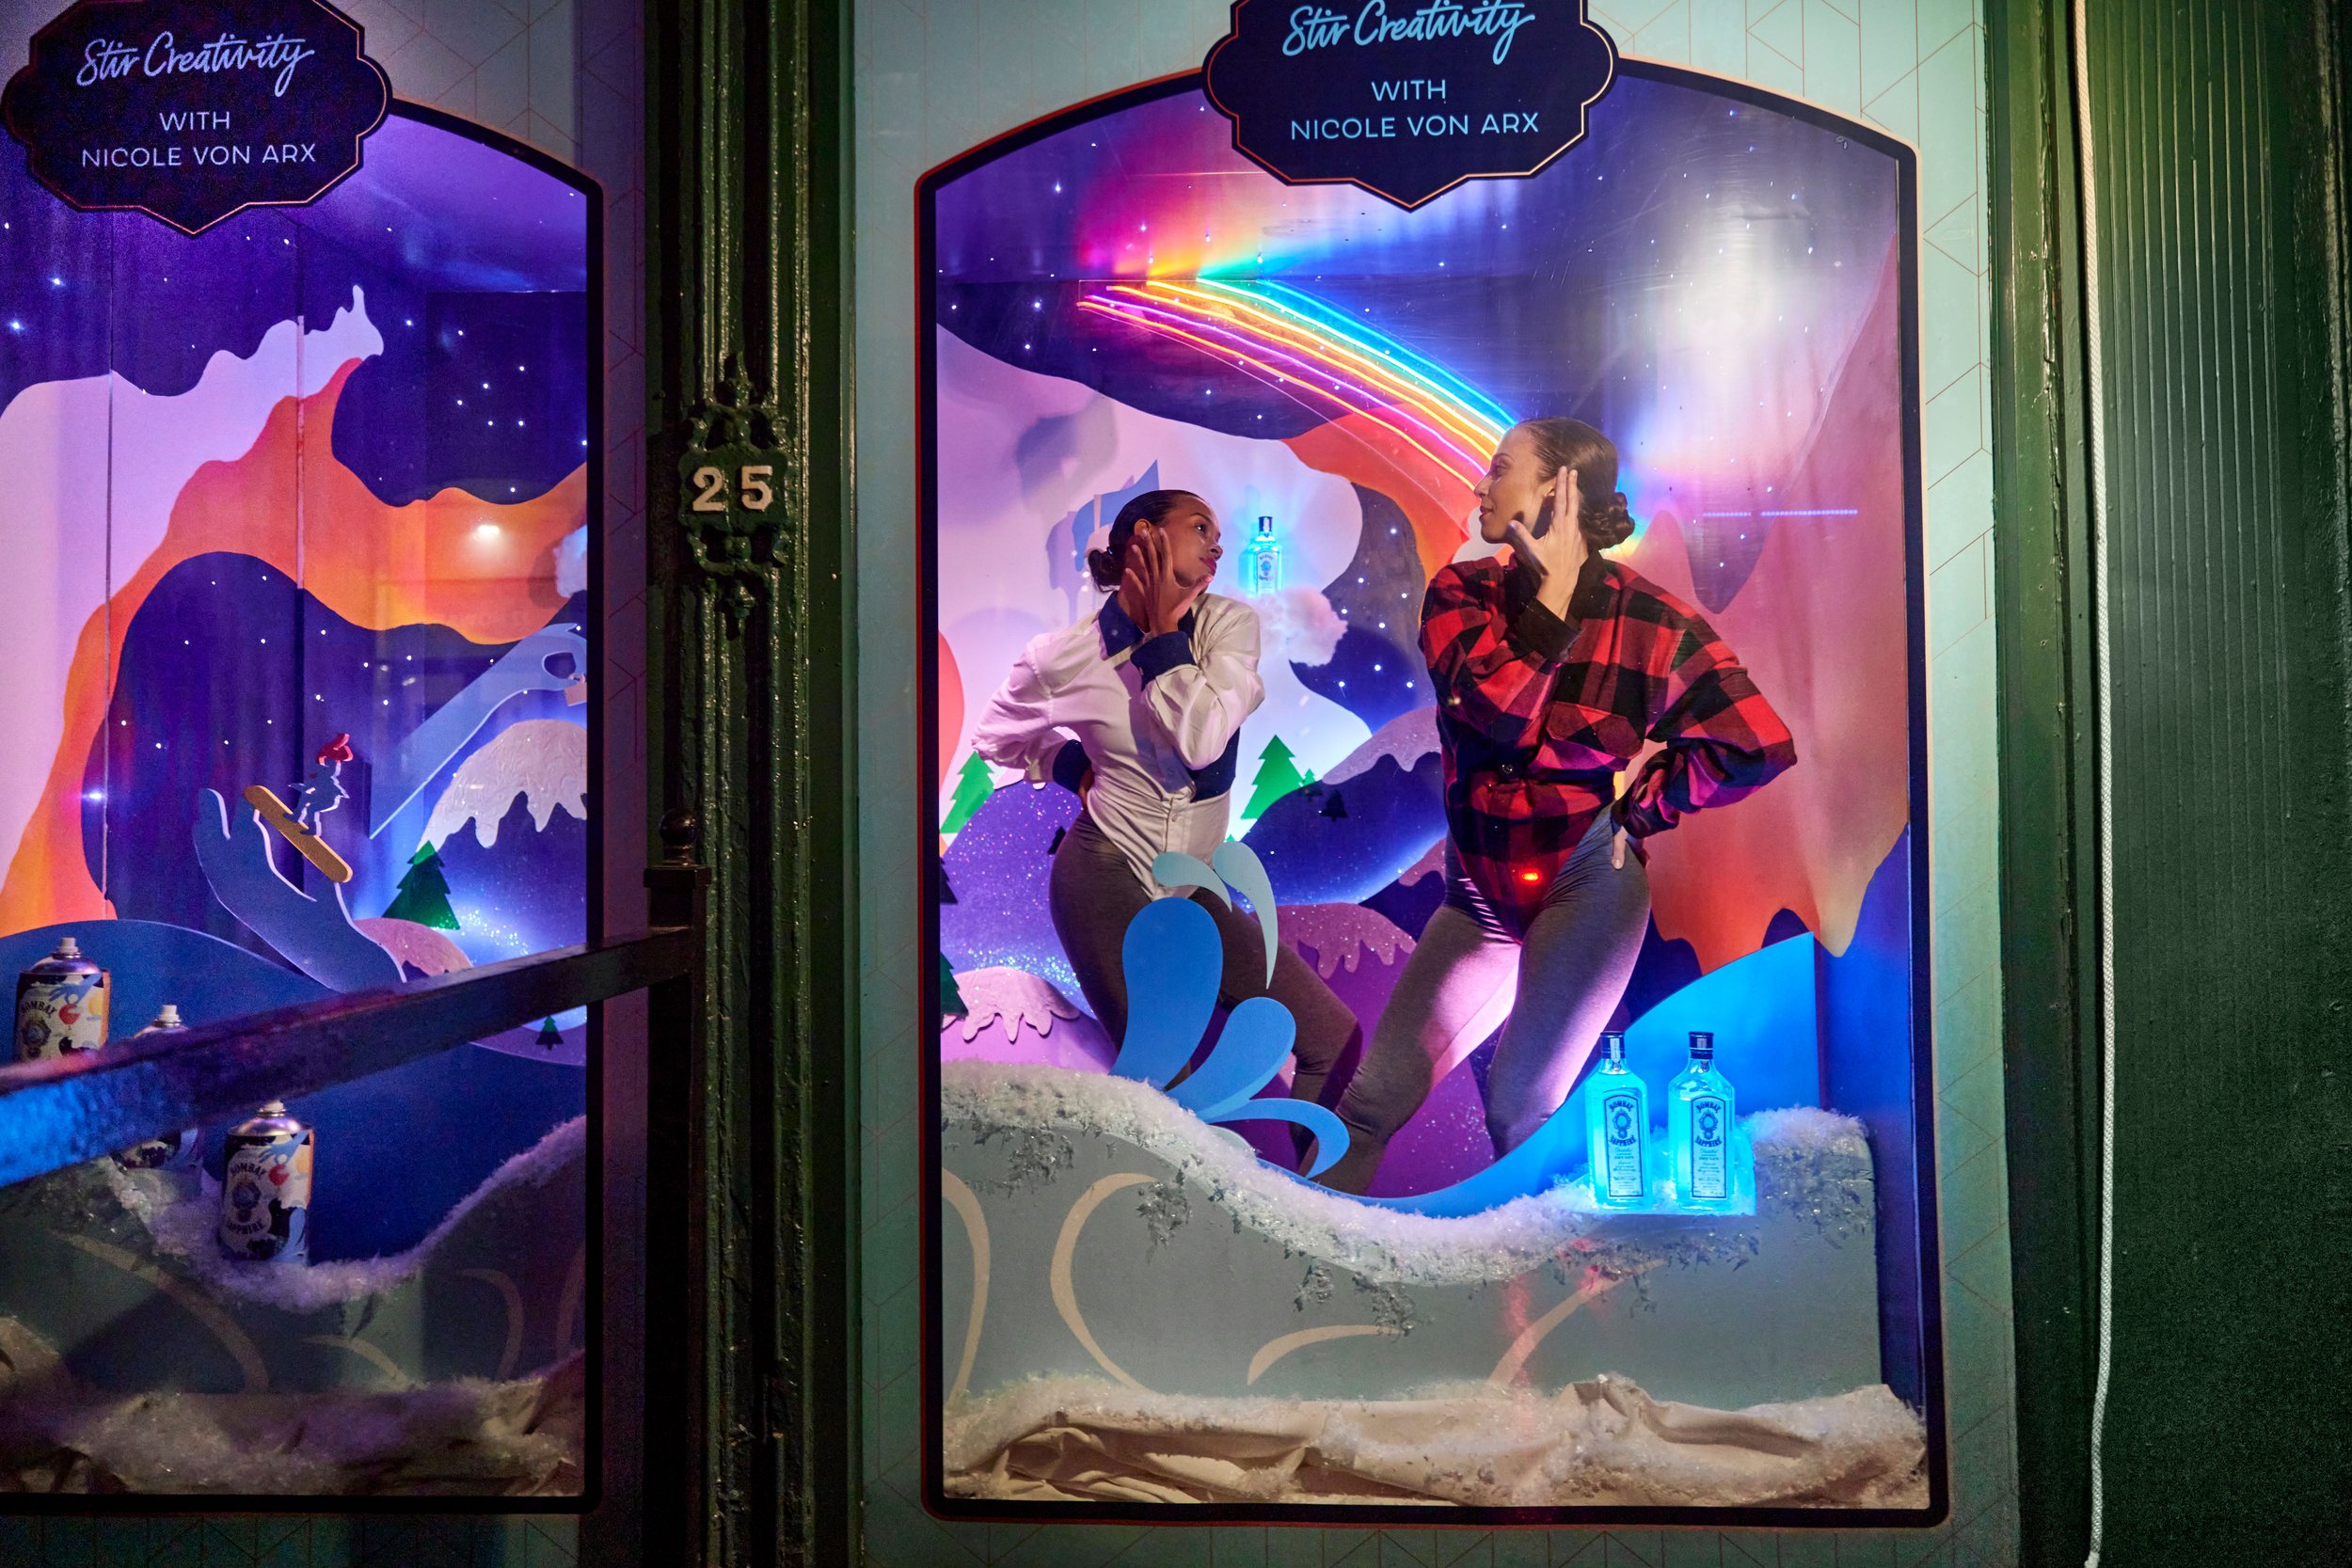  BOMBAY SAPPHIRE is proud to unveil its inaugural&nbsp; holiday window display, celebrating the new artistic guard and New York City’s creative comeback.&nbsp; Though the BOMBAY SAPPHIRE holiday windows are inspired by the traditional 5th&nbsp;Avenue